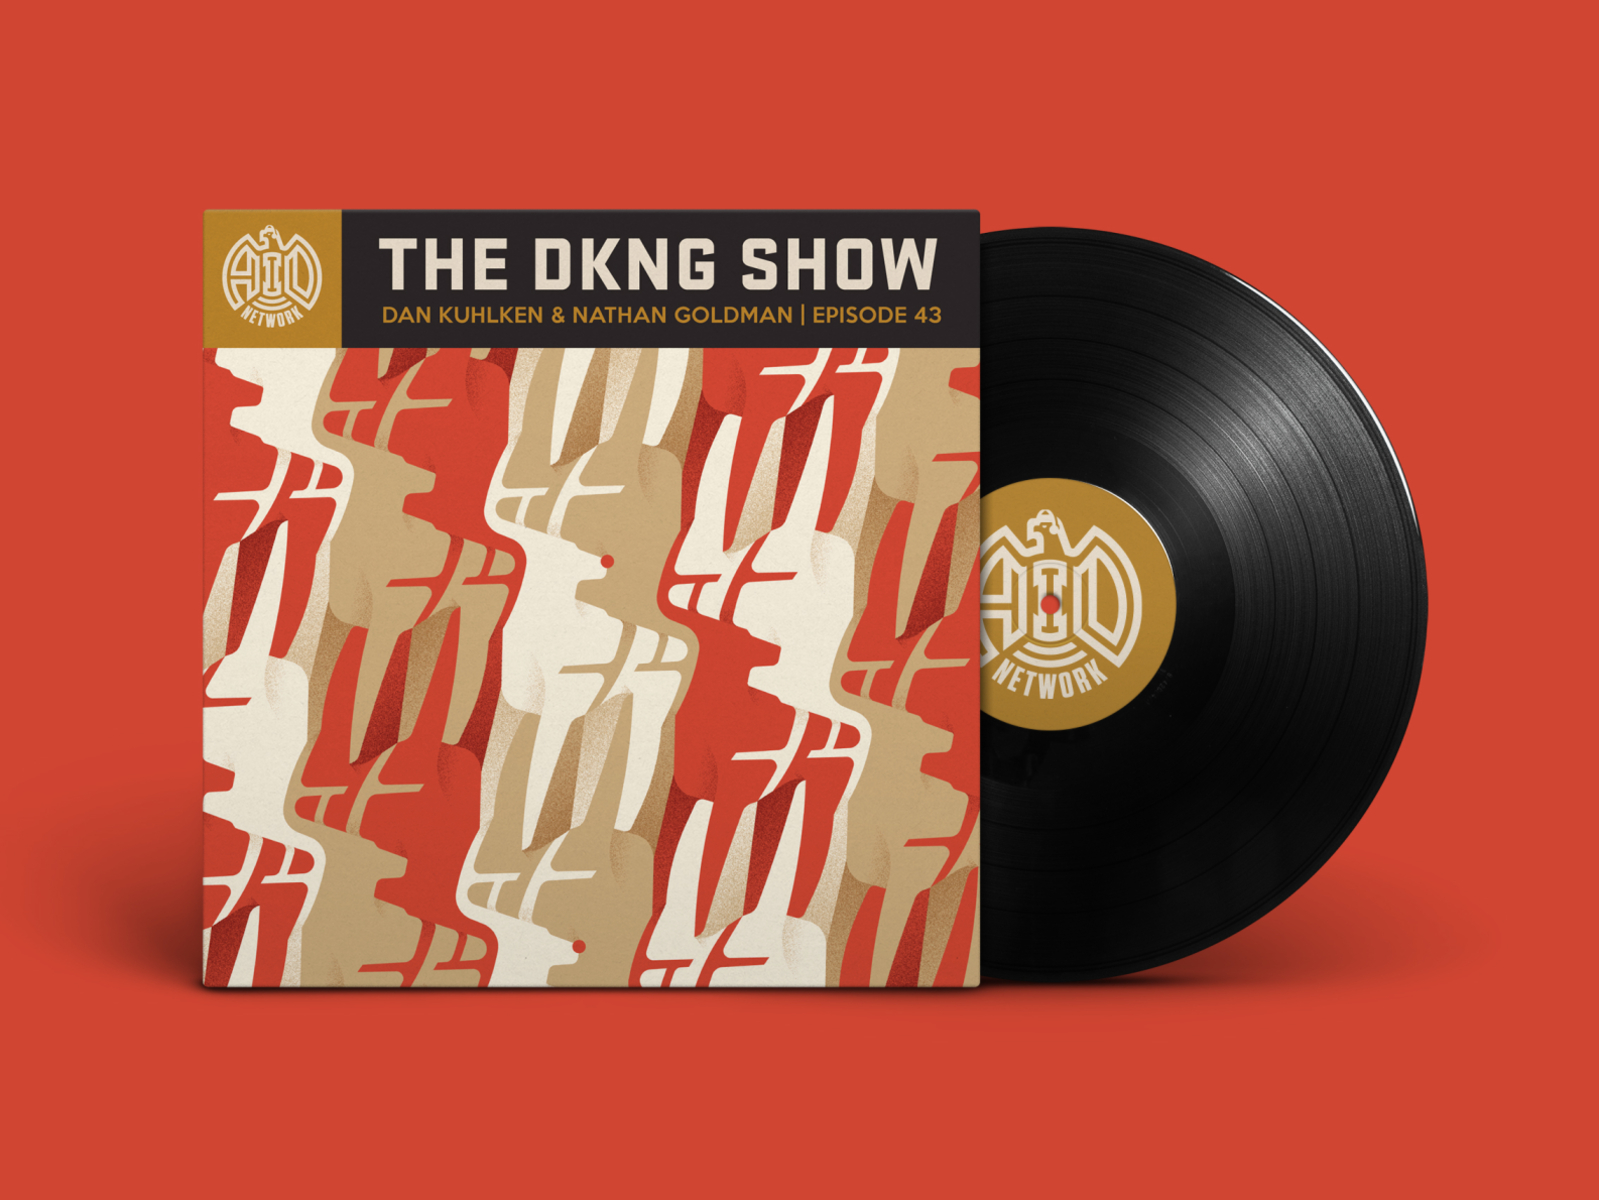 dkng podcast cover images design